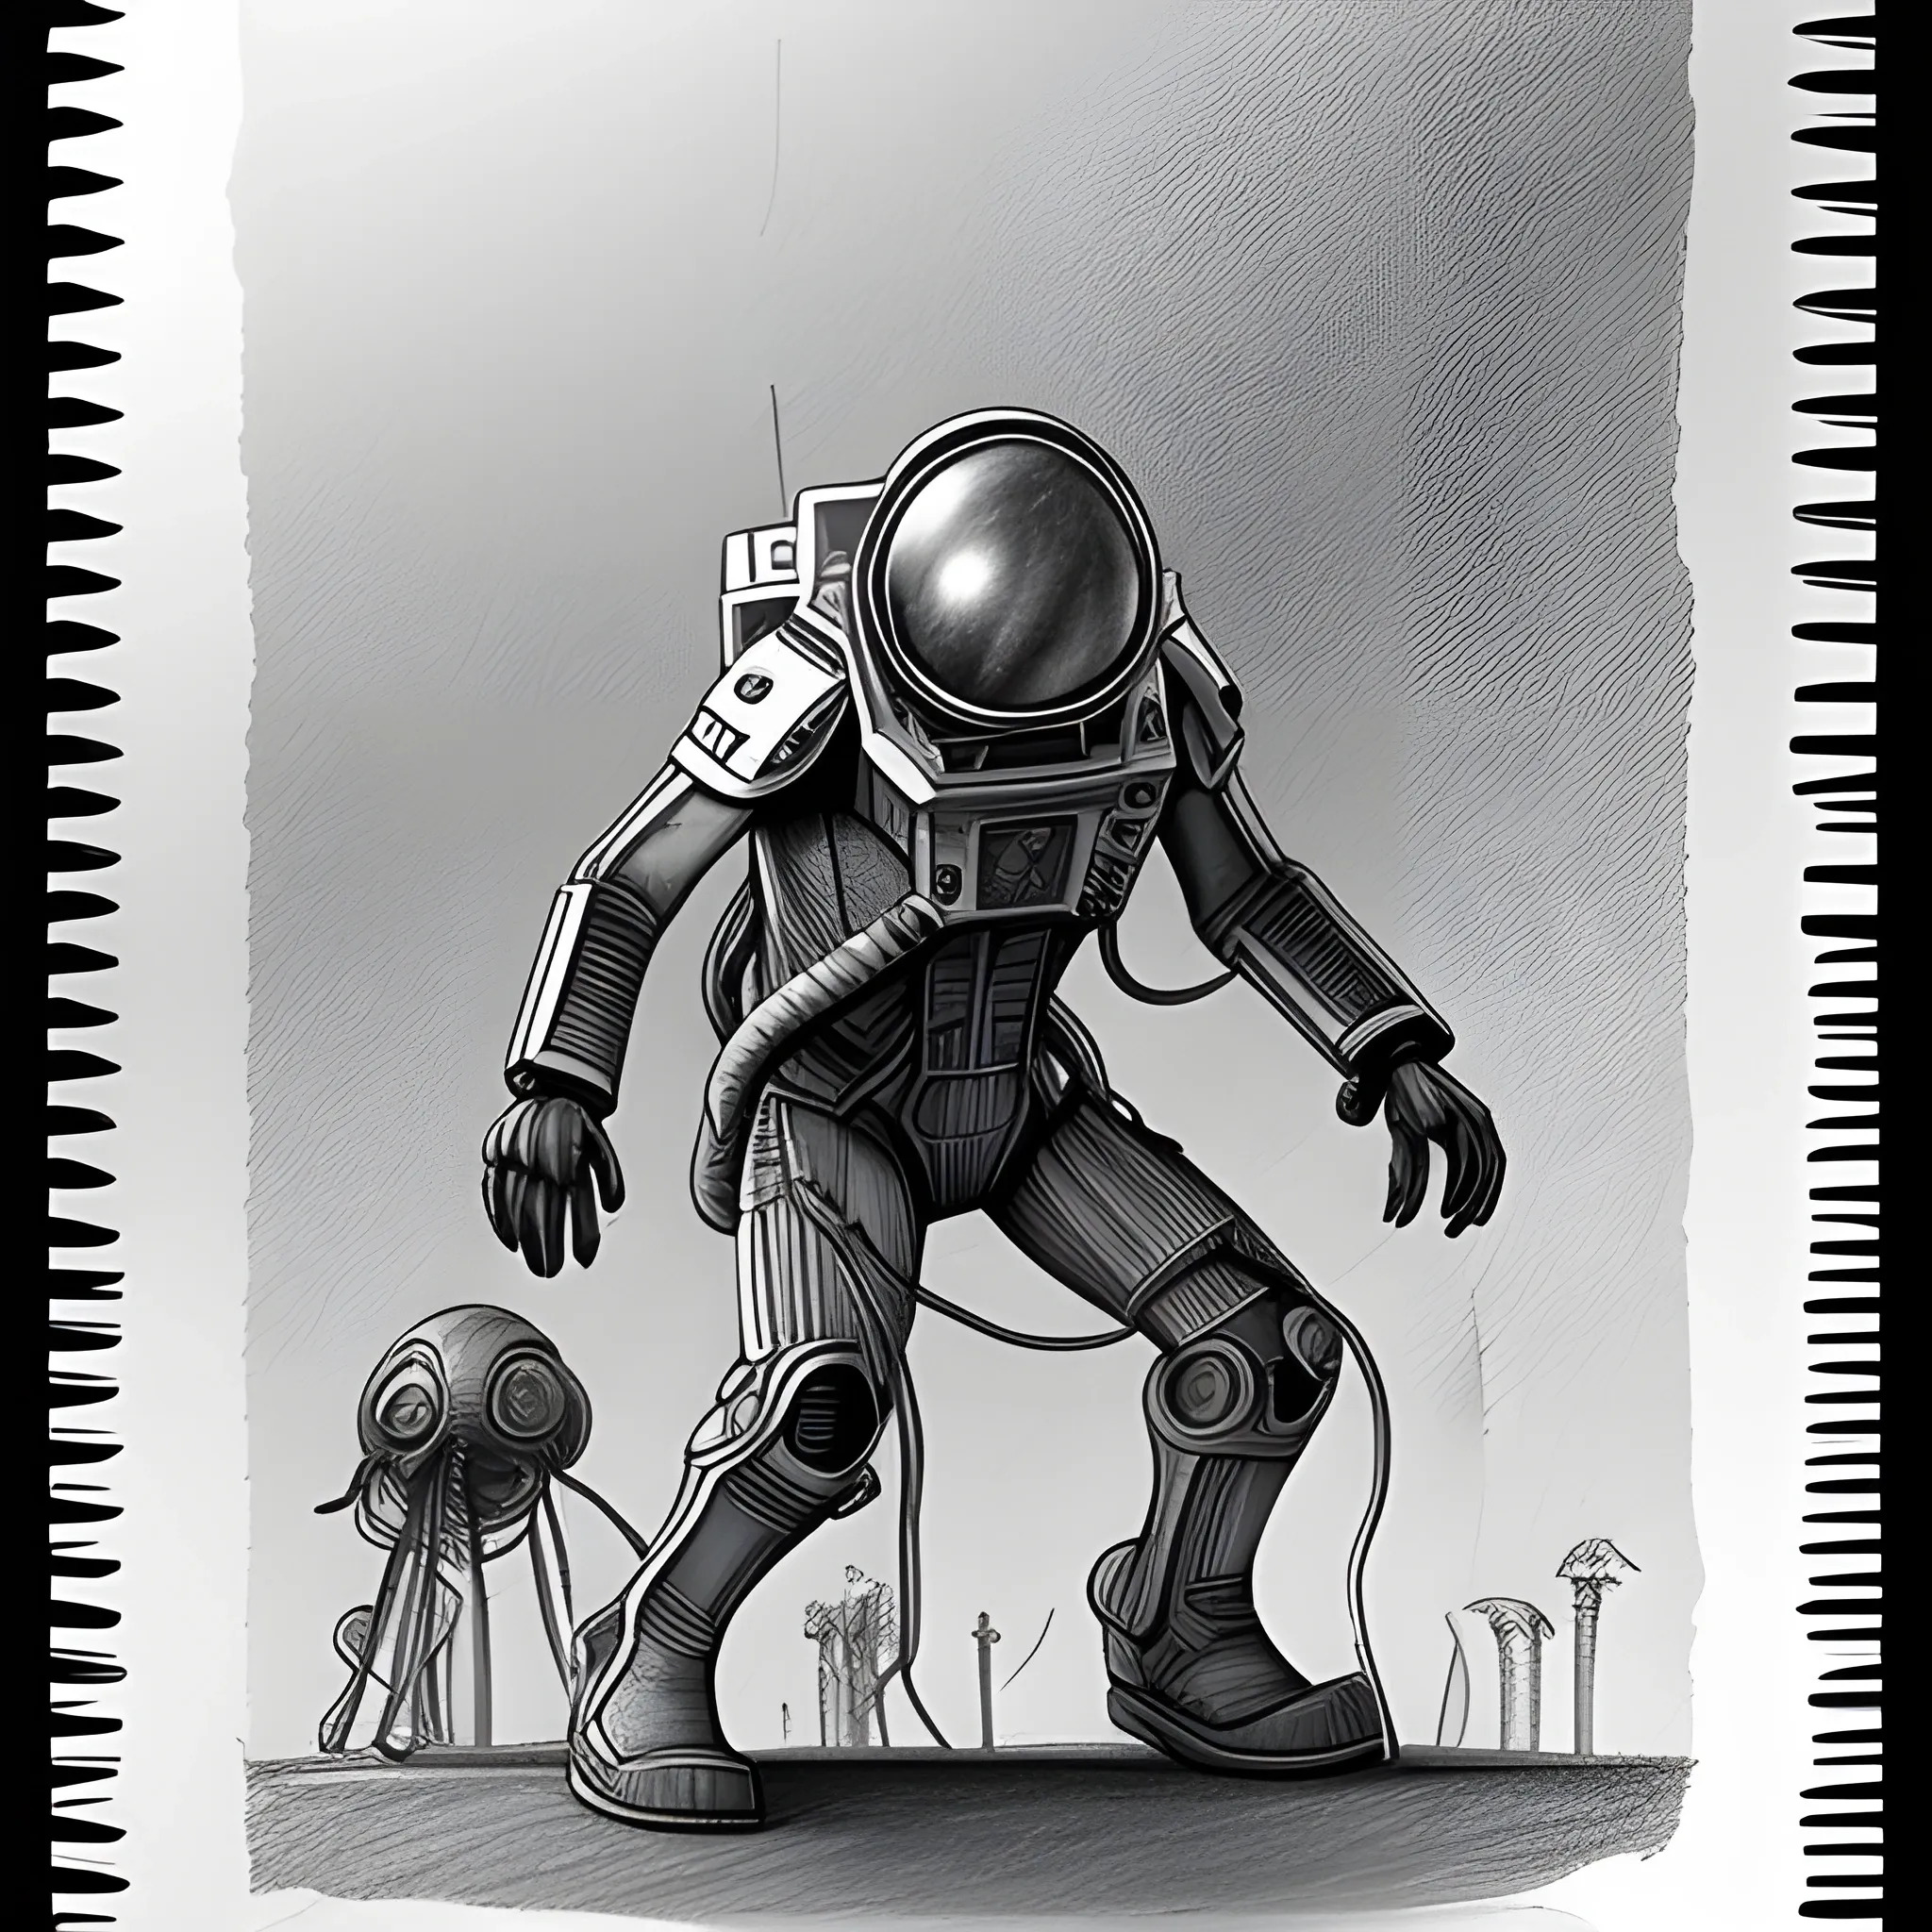 The Martian from the book The War of the Worlds. Pencil Sketch, Pencil Sketch